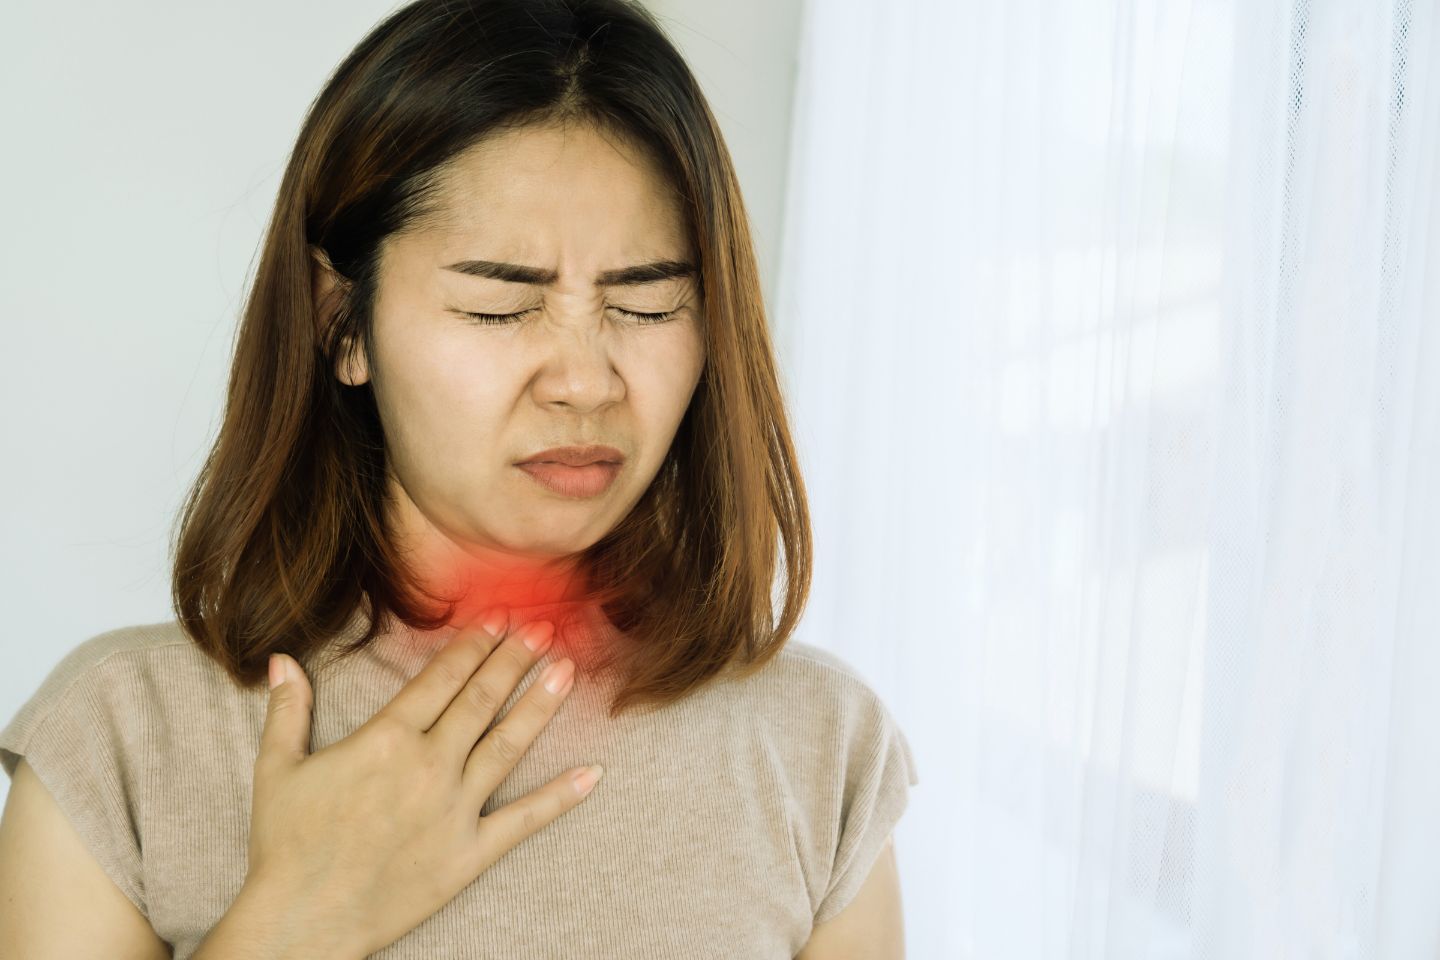 A woman experiencing discomfort or pain in her throat, which is highlighted with a red glow to indicate the affected area. She is grimacing and holding her throat, suggesting she might have a sore throat, possibly due to an infection such as strep throat.